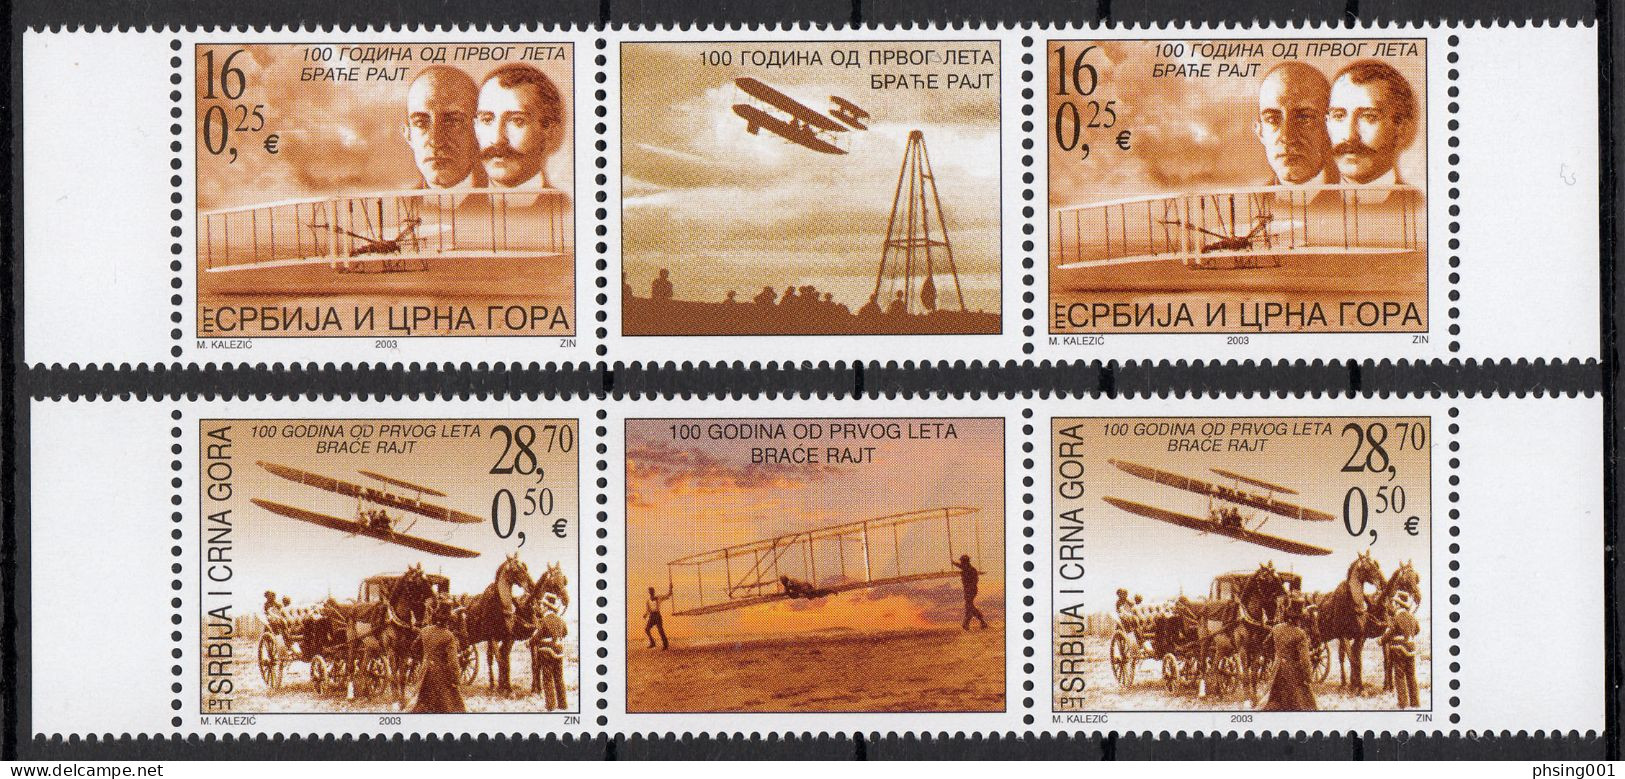 Yugoslavia 2003 Serbia&Montenegro 100 Annive The First Wright Brothers Flight Airplanes Aircrafts Horses, Middle Row MNH - Nuevos